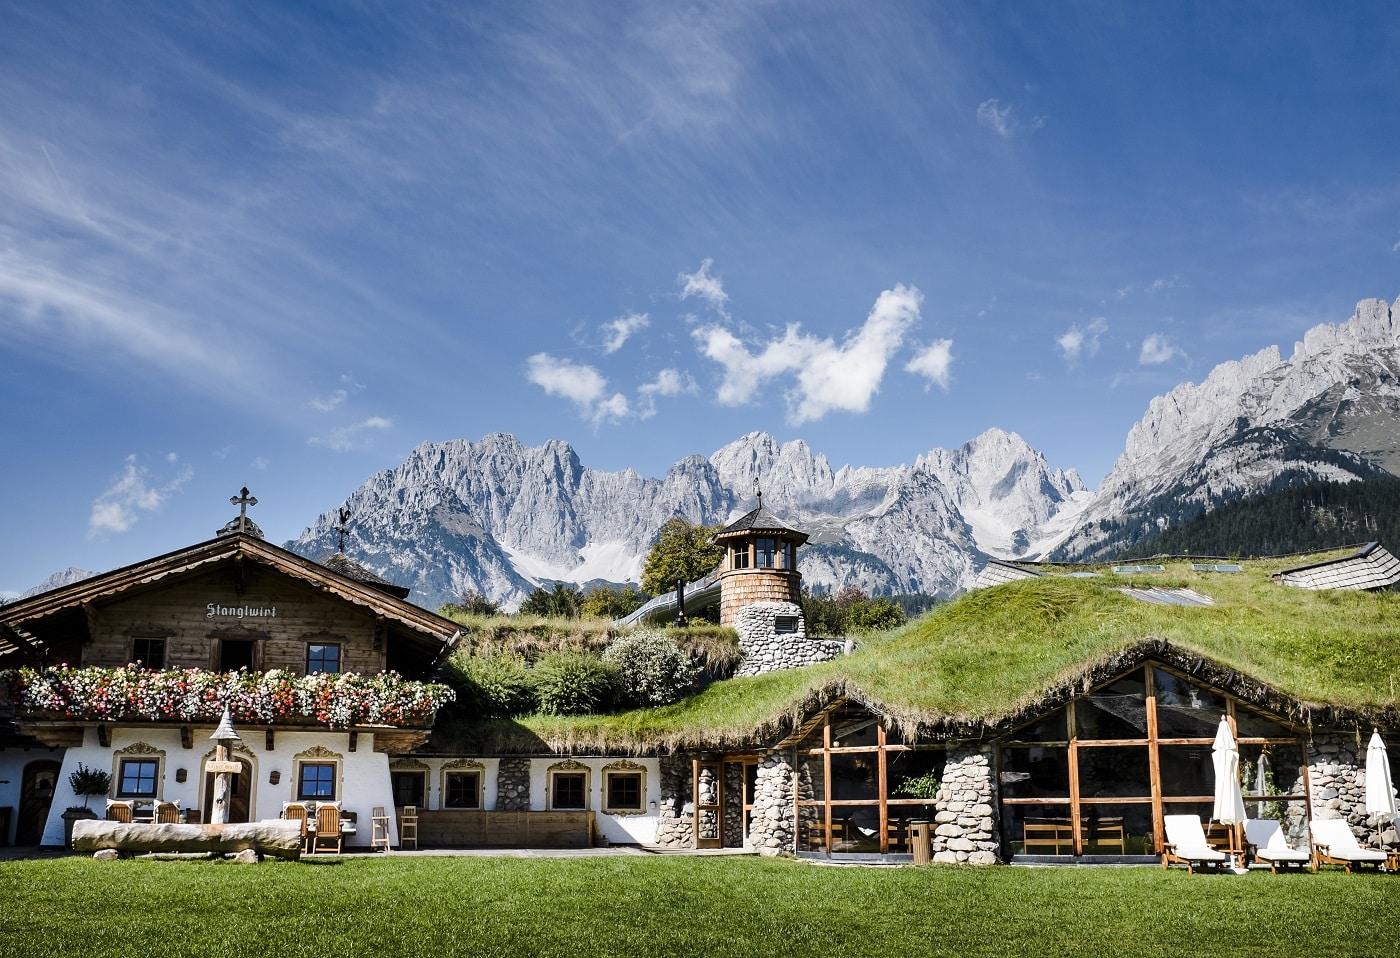 An exterior shot of the resort in the spring, rich with flowers and greenery, the Wilder Kaiser mountain range in the background